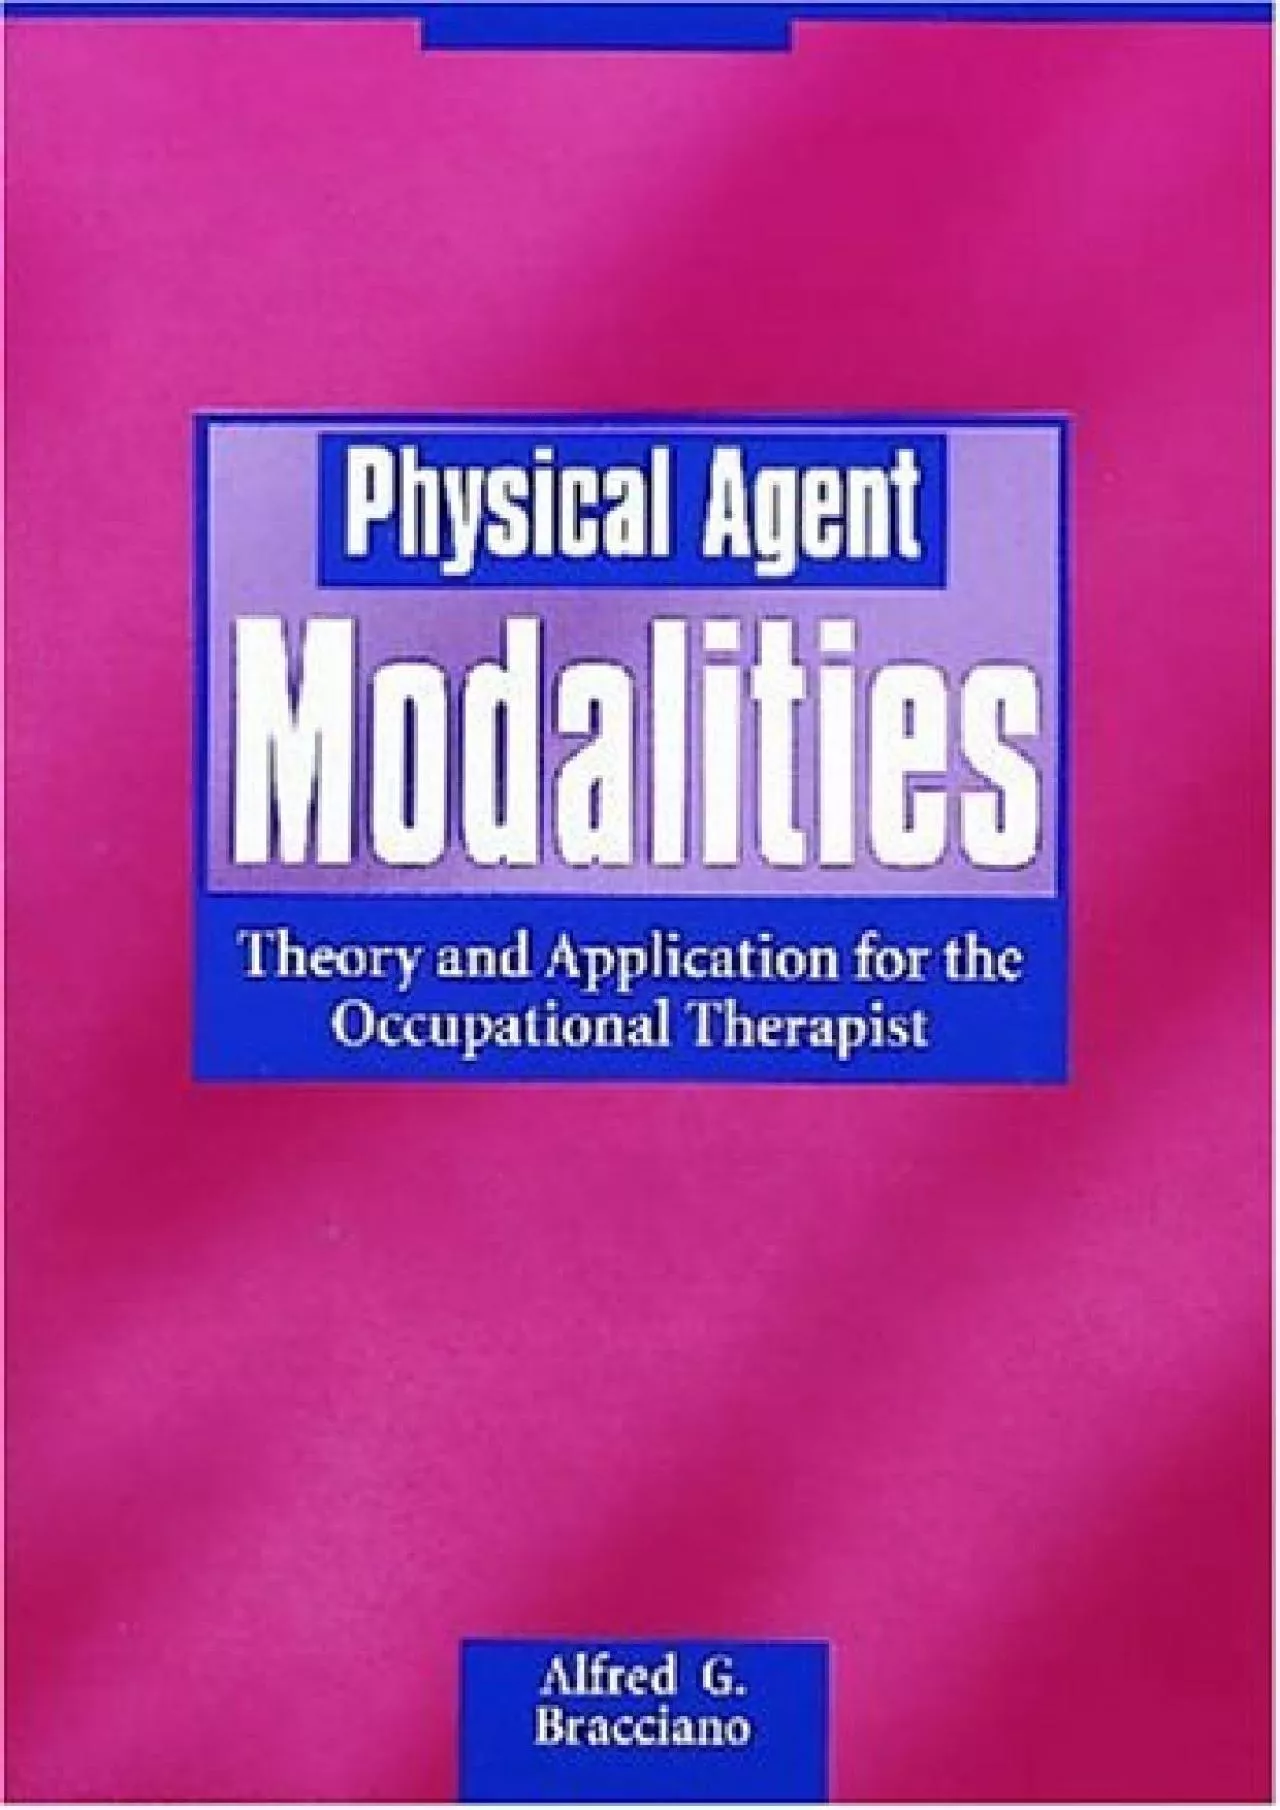 (EBOOK)-Physical Agent Modalities: Theory and Application for the Occupational Therapist